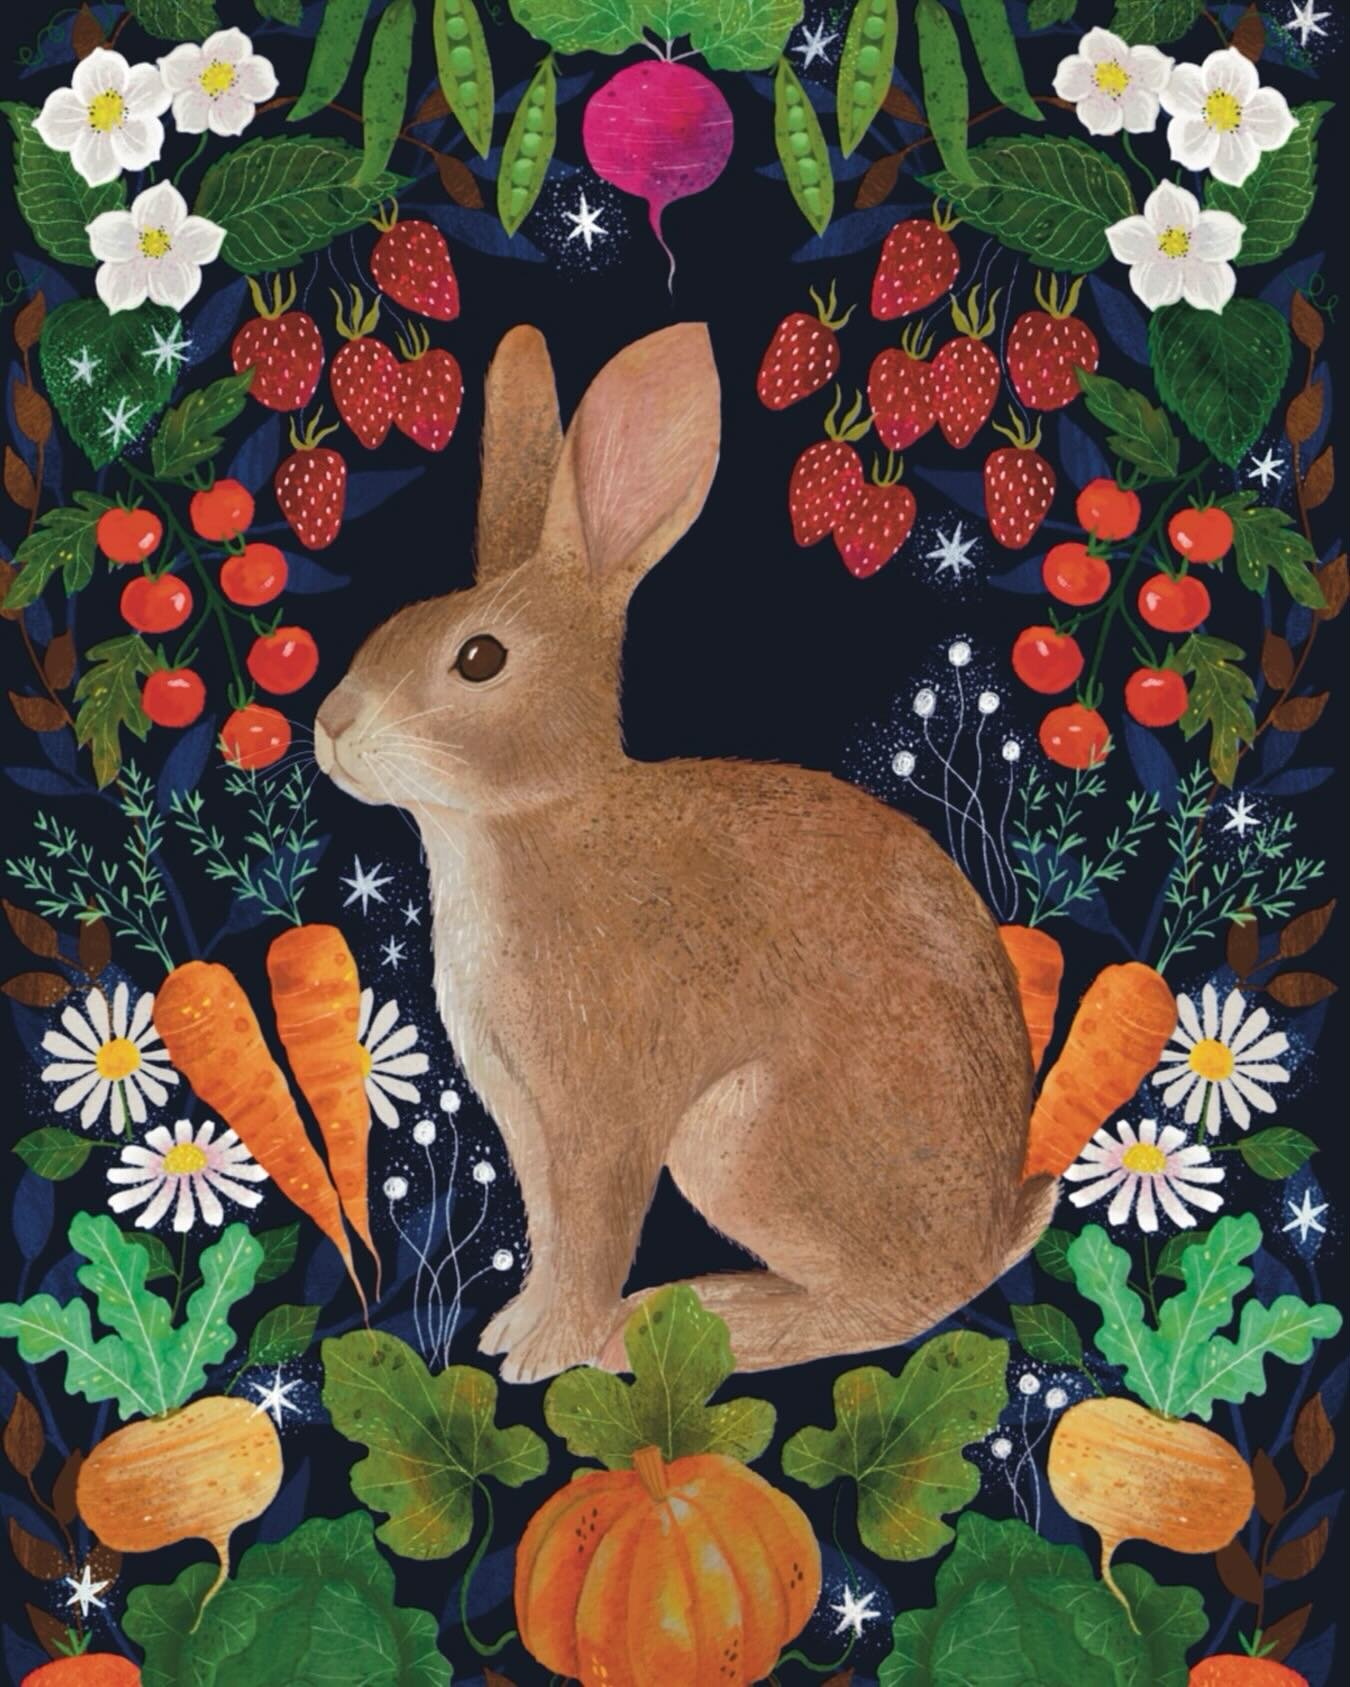 This could be called Rabbits Dream 😆. Thank you for all the lovely comments on my last post 💙I&rsquo;ll be making all my recent artwork available as giclee prints on my website soon!

#illustration #illustrator #artlicensing #rabbit #veggiegarden #